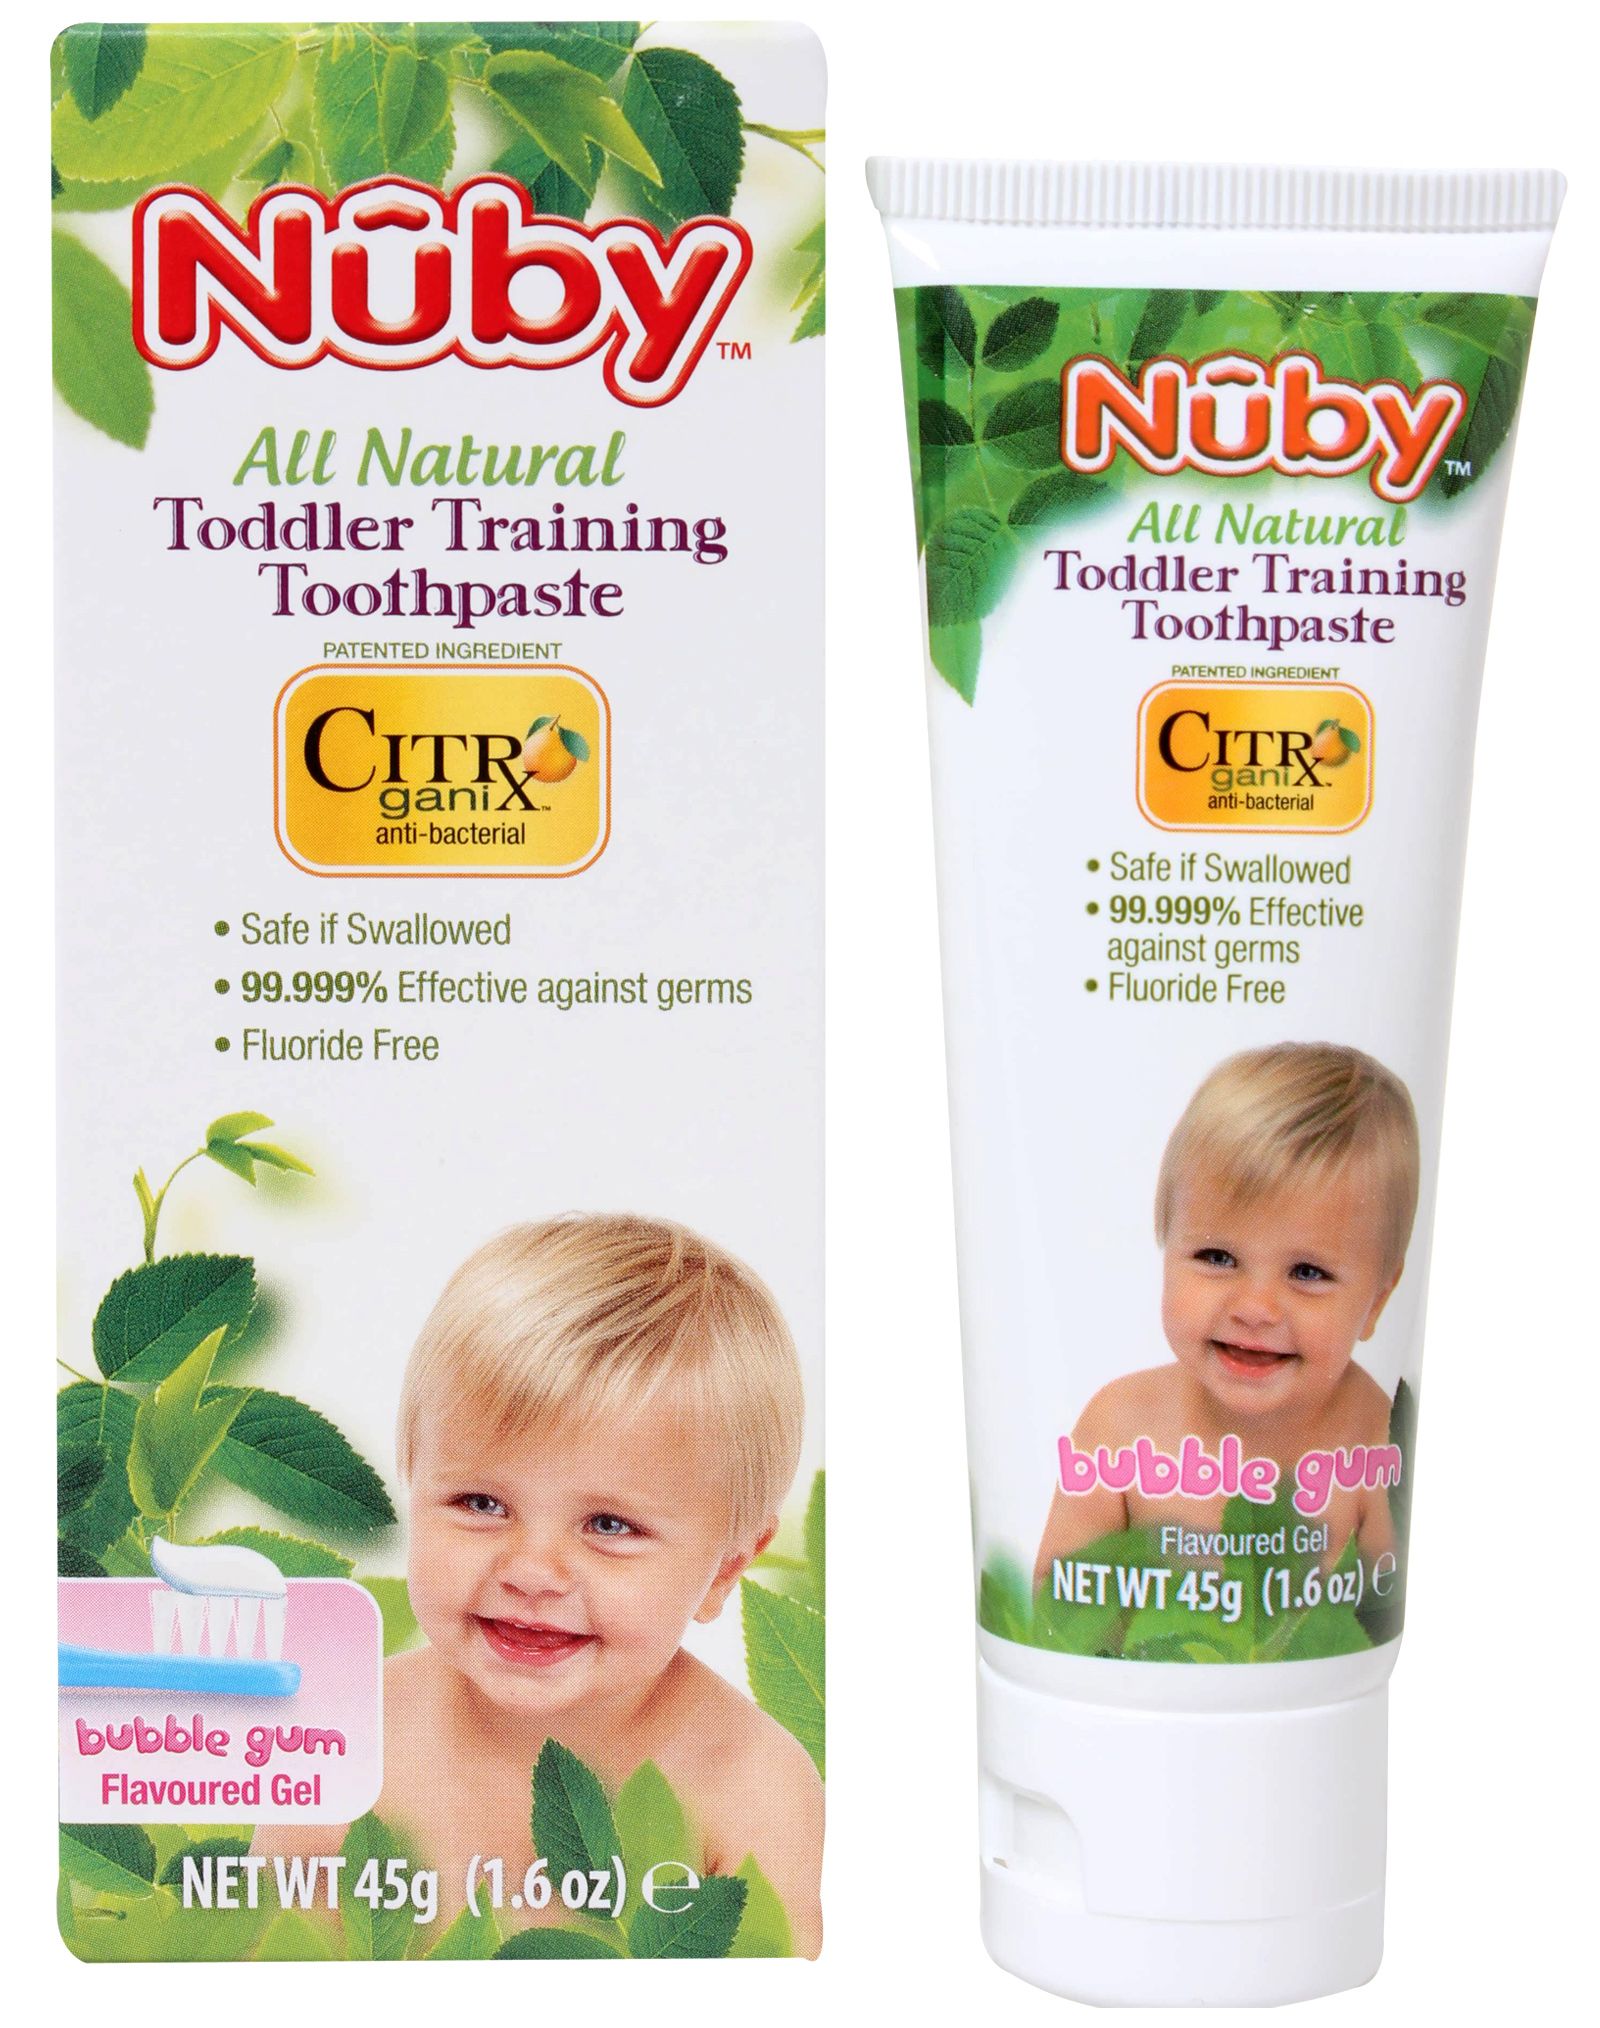 Nuby All Natural Toddler Training Toothpaste